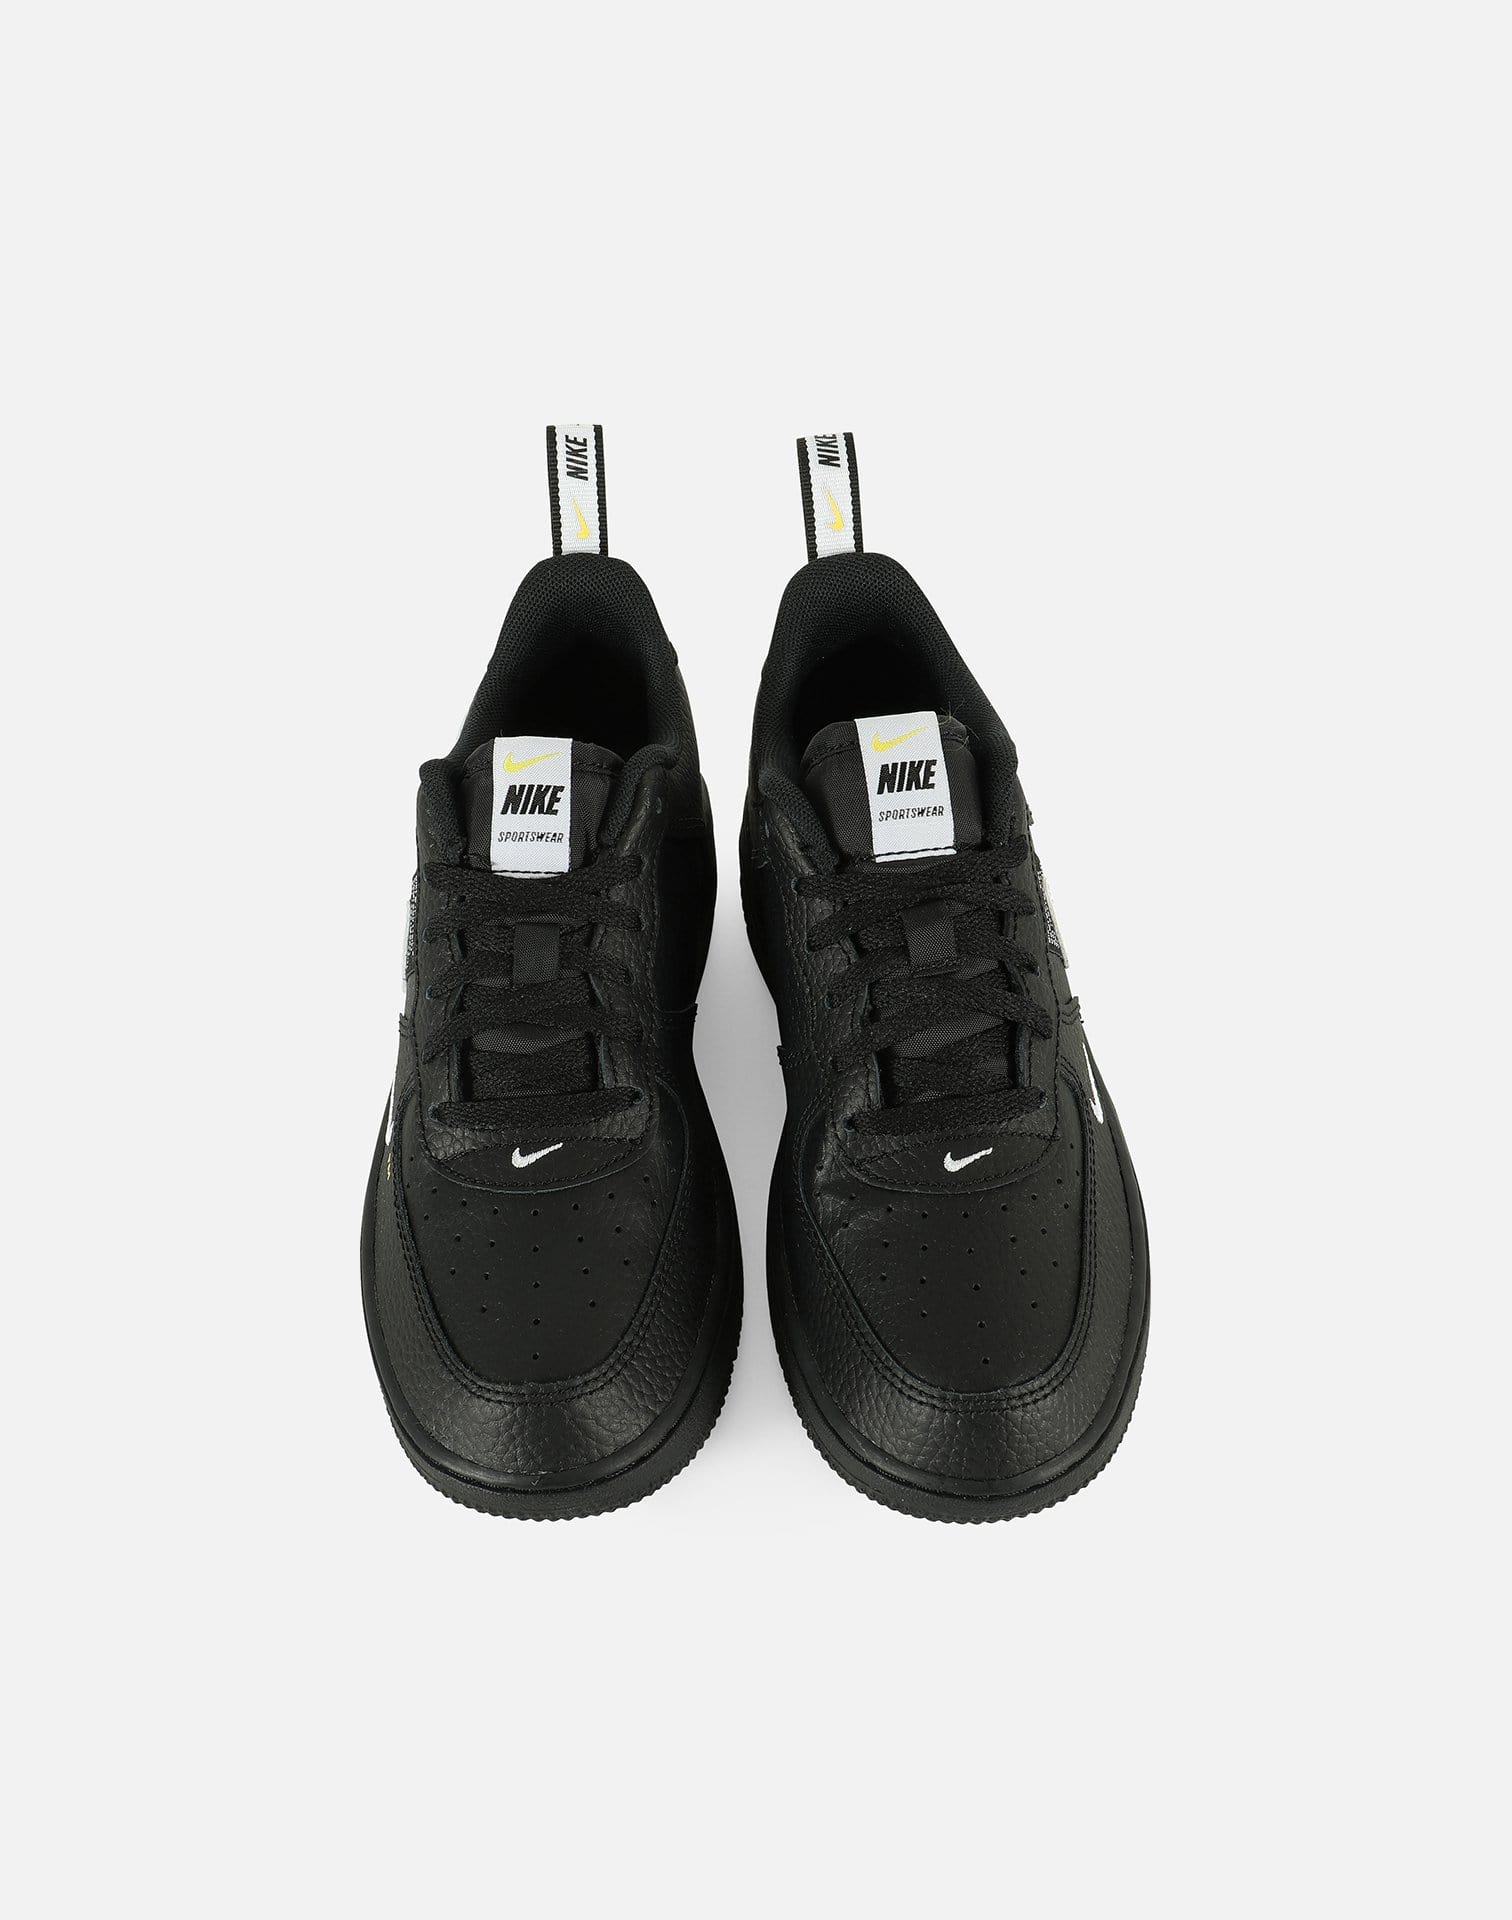 Nike AIR FORCE 1 '07 LV8 UTILITY – DTLR